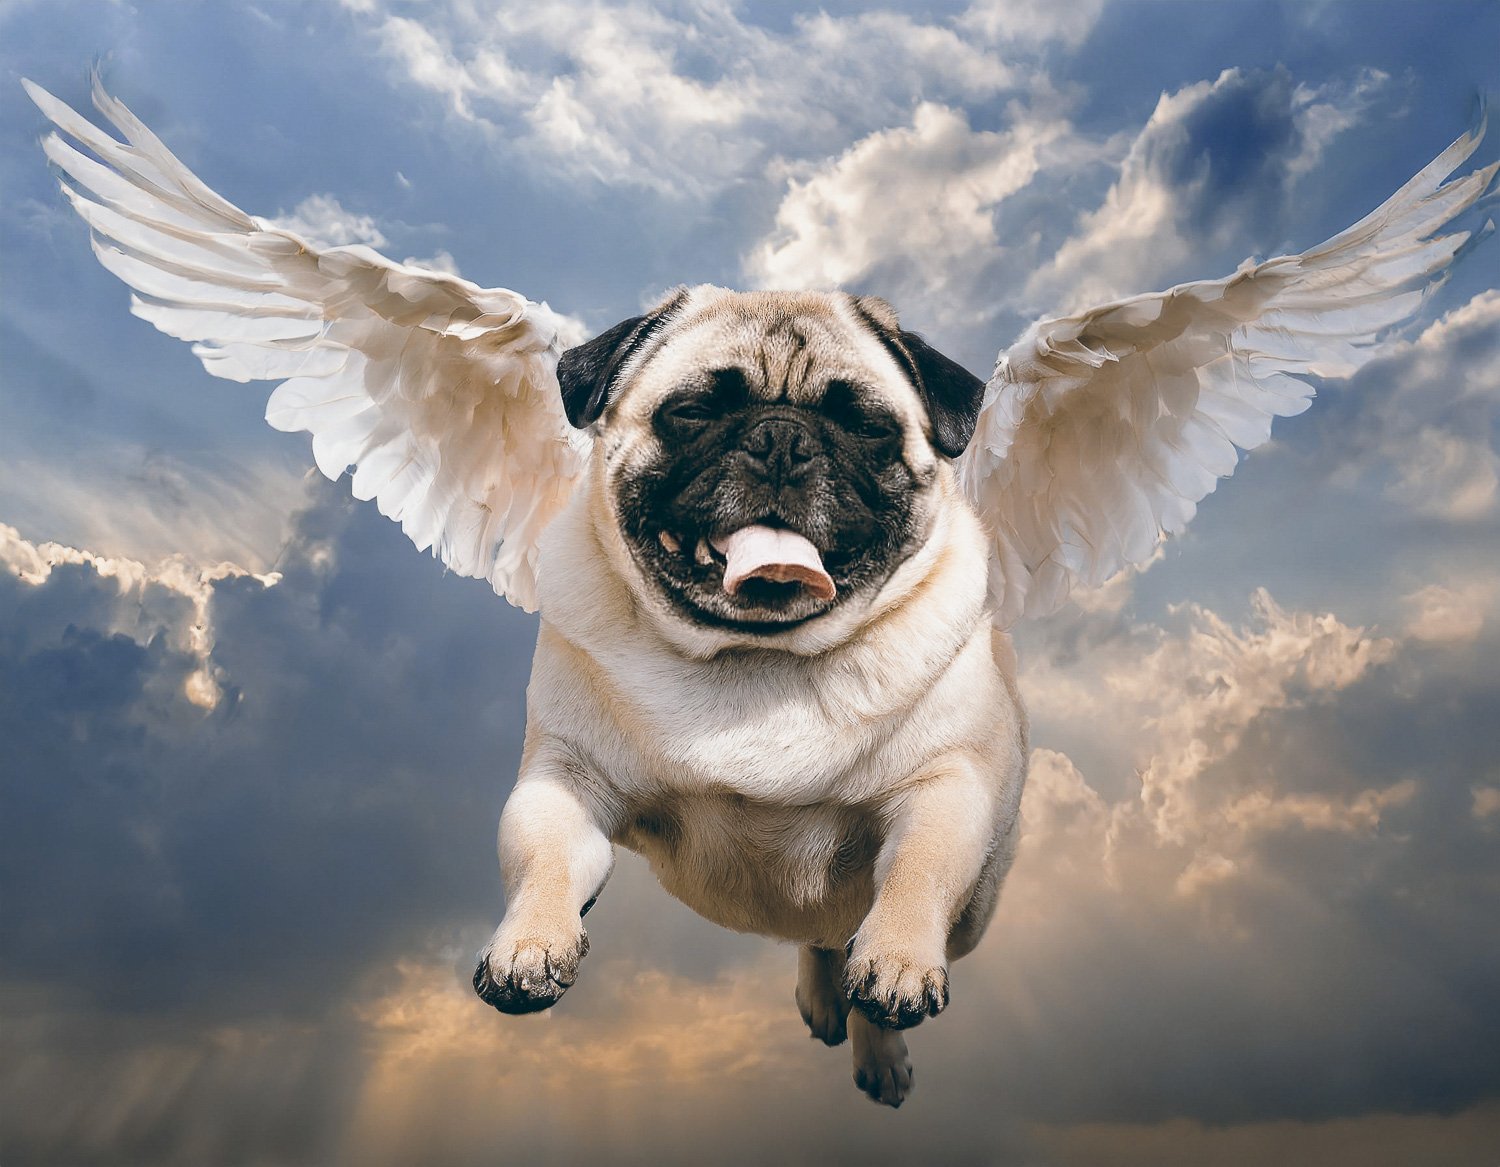 A black and white pug dog with wings flying in a cloudy sky